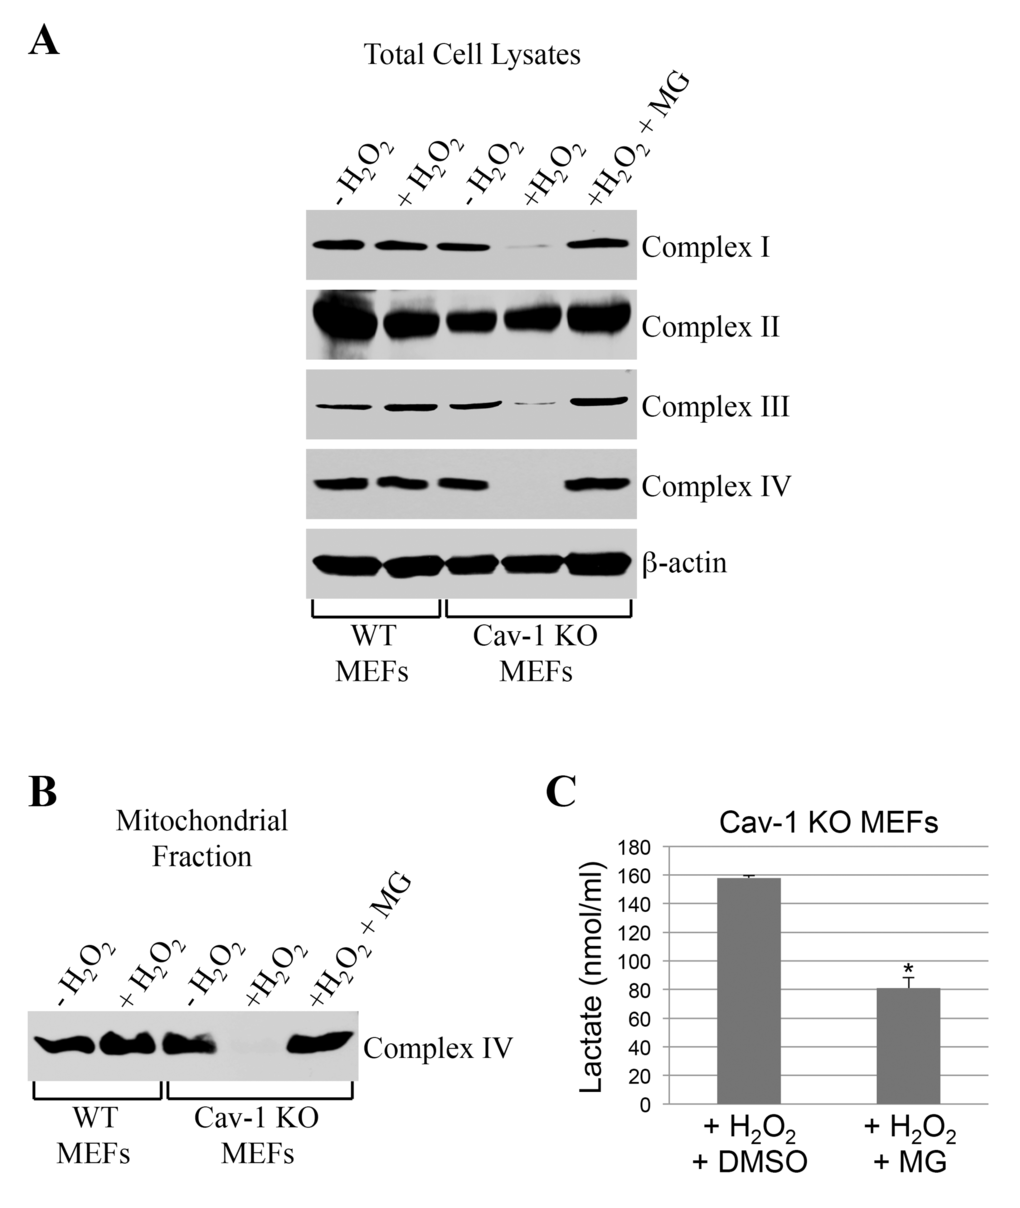 Proteasome inhibition rescues the expression of respiratory chain complexes in ROS-treated caveolin-1 null MEFs. Wild type and caveolin-1 null mouse embryonic fibroblasts (MEFs) were treated with sublethal doses of hydrogen peroxide (150 μM) for 2 hours in the presence or absence of 0.1 μM MG-132. Cells were then recovered in complete medium for 7 days in the presence or absence of 0.1 μM MG-132. Untreated cells (-H2O2) were used as control. (A) Total expression of complex I, complex II, complex III and complex IV was determined by immunoblotting analysis using specific antibody probes. Immunoblotting with anti-β-actin IgGs was performed as internal control. (B) Mitochondria were isolated and the expression of complex IV was determined using anti-complex IV IgGs. (C) Lactate production was quantified using the Lactate Assay Kit from Sigma-Aldrich (MAK064). Values were normalized to cell number. Values in (C) represent mean ± SEM; *P